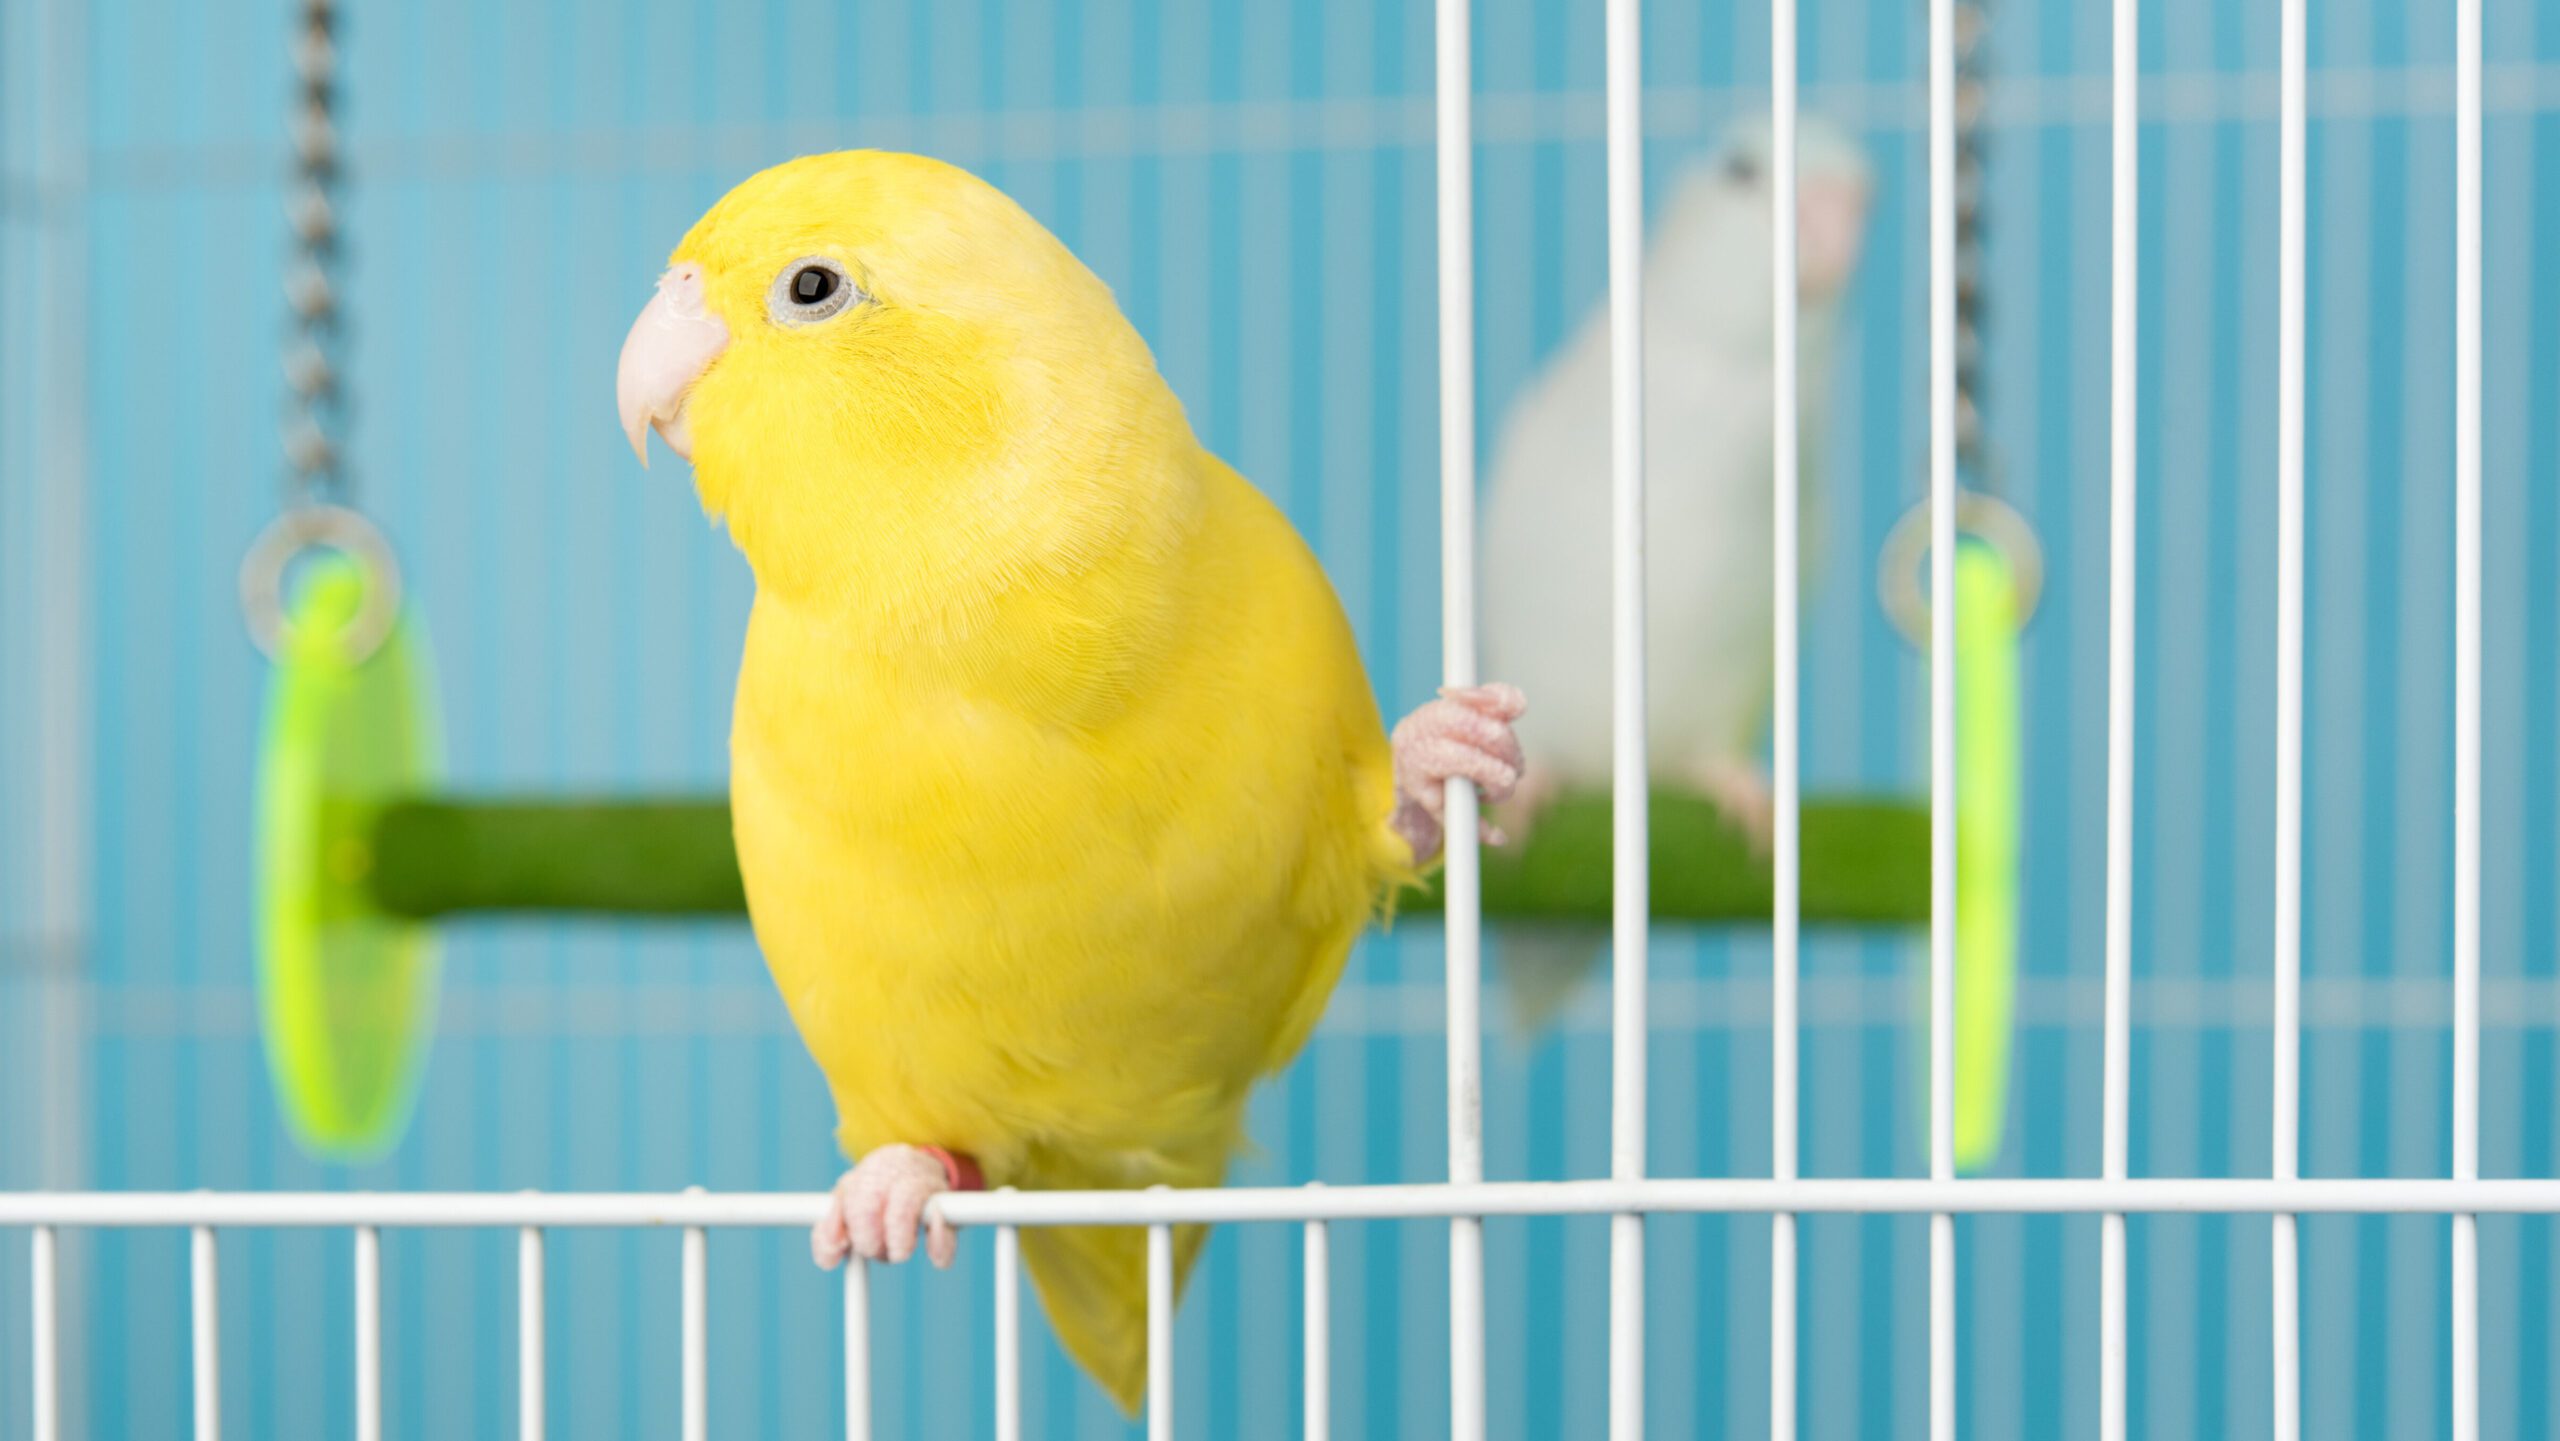 It might be beneficial to let your bird fly freely outdoors, but the risks probably outweigh the positives.